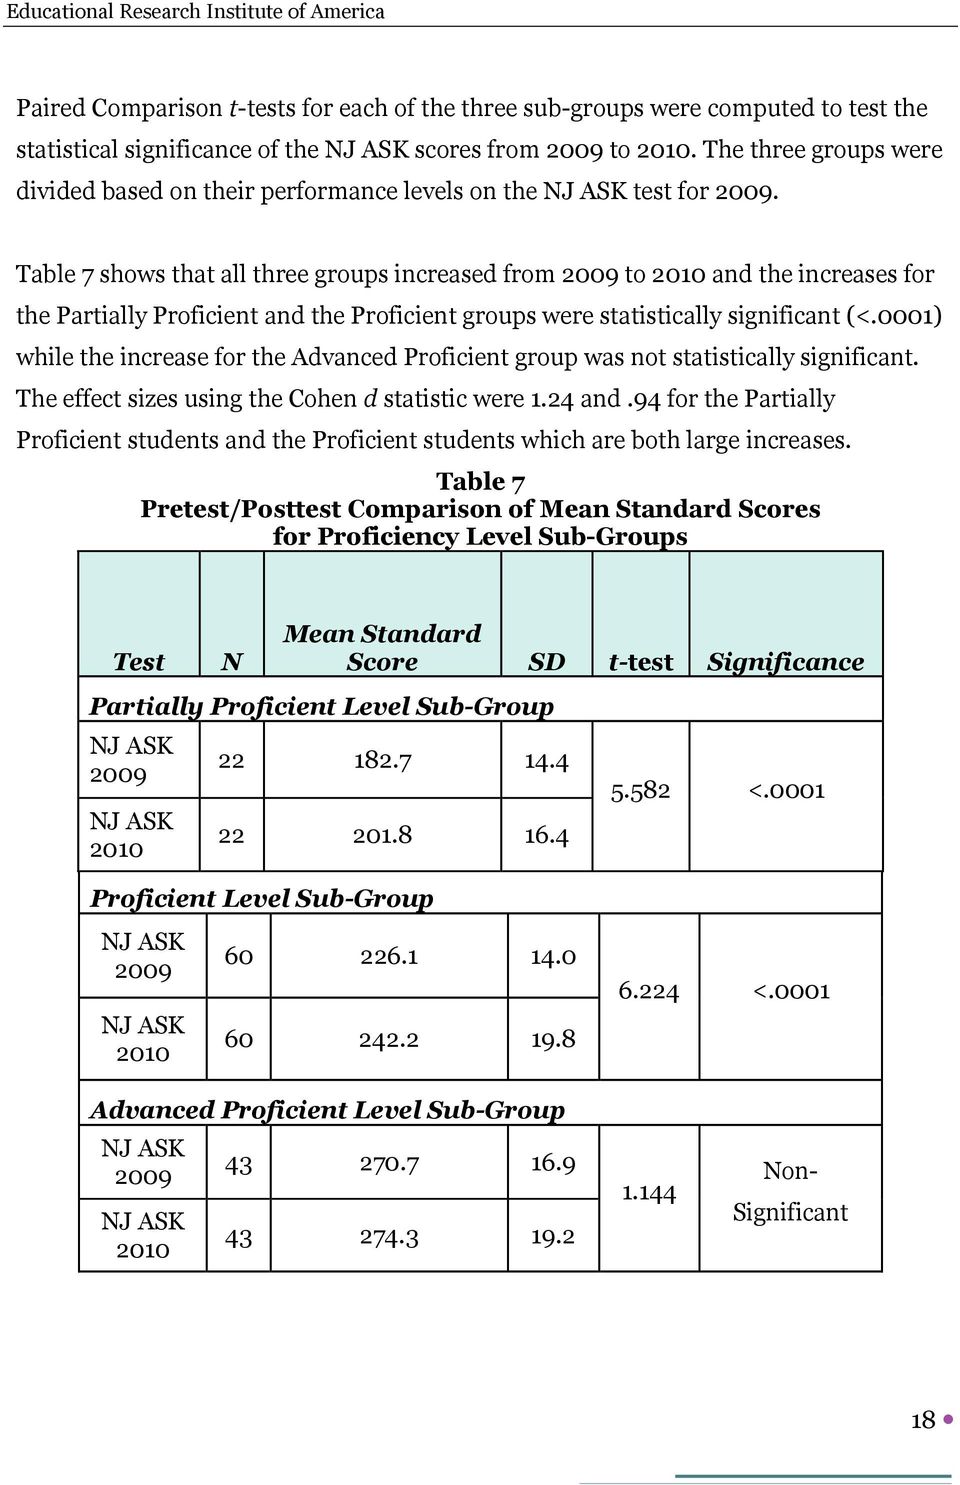 Table 7 shows that all three groups increased from 2009 to 2010 and the increases for the Partially Proficient and the Proficient groups were statistically significant (<.